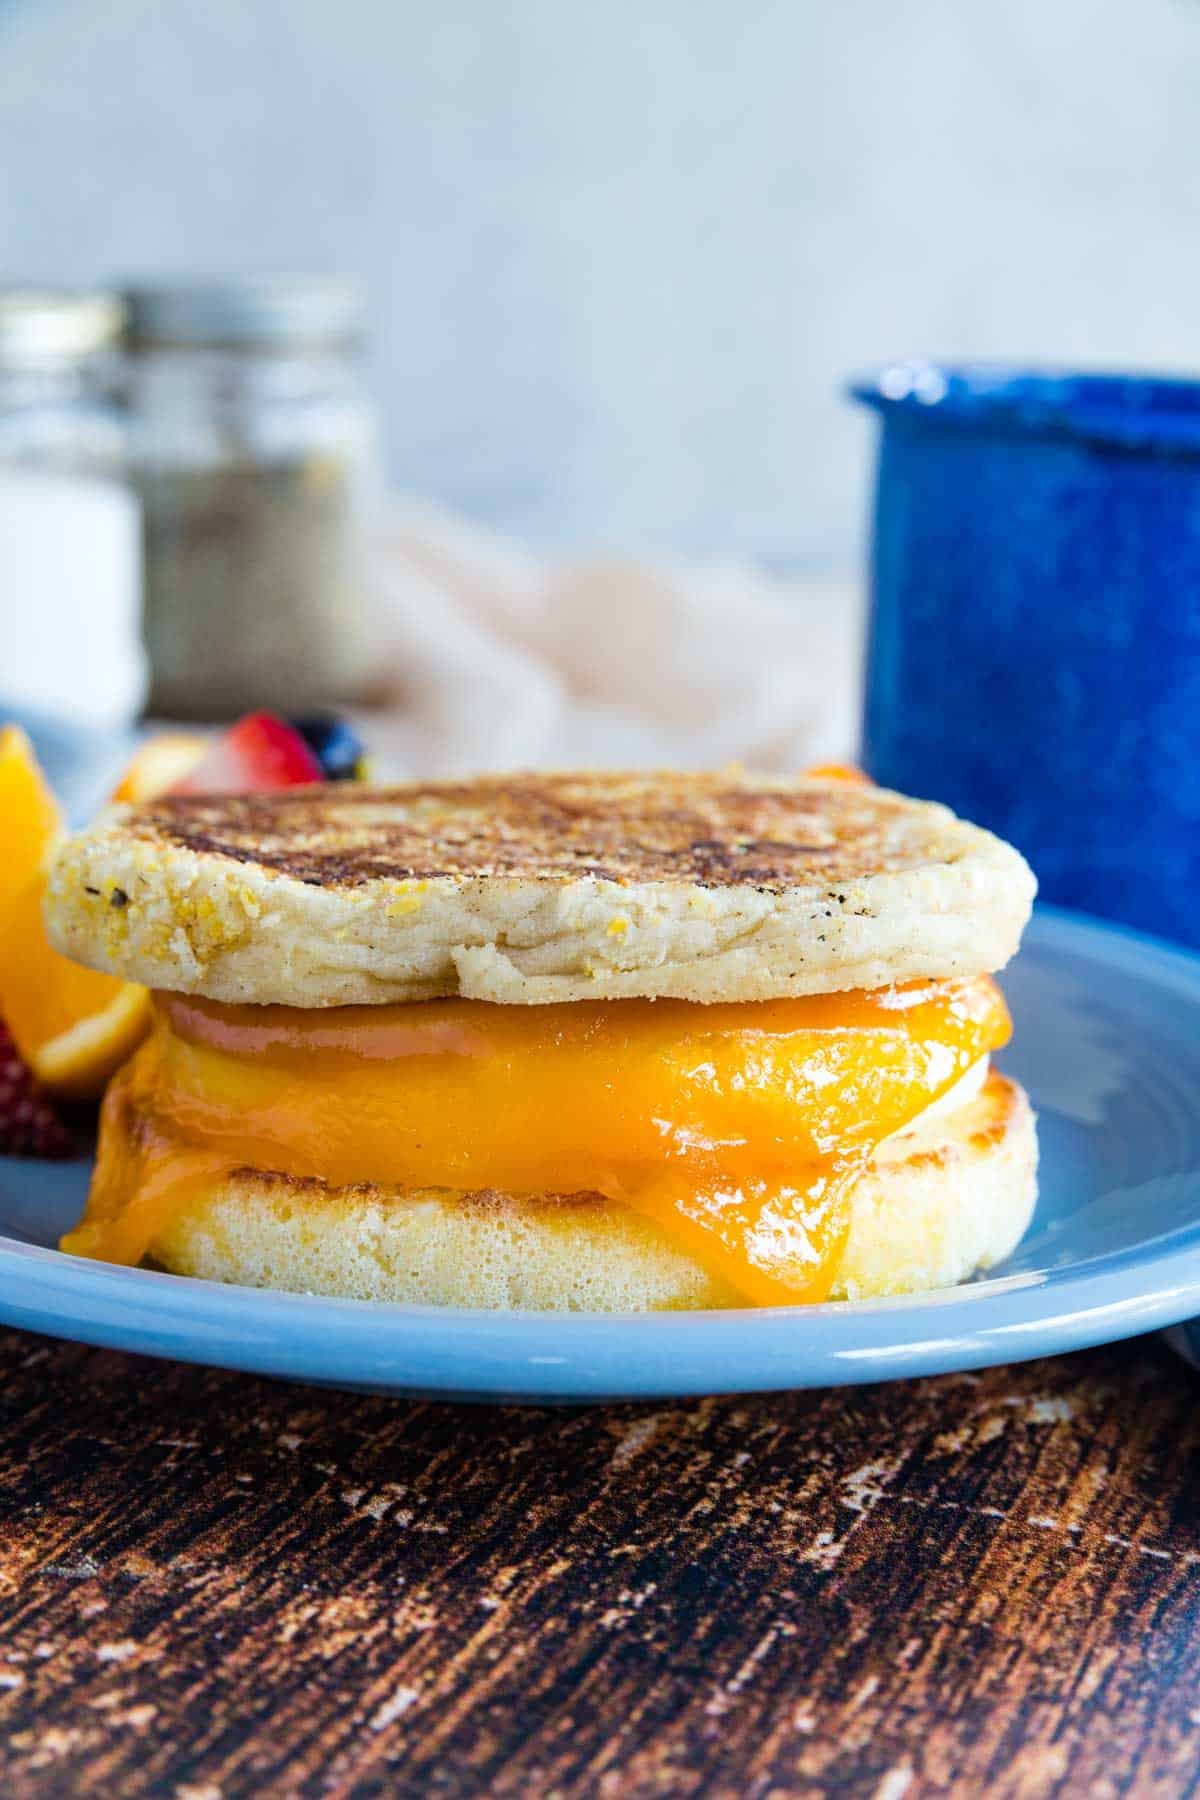 A gluten free breakfast sandwich on a blue plate next to fresh fruit, with a blue coffee mug in the background.